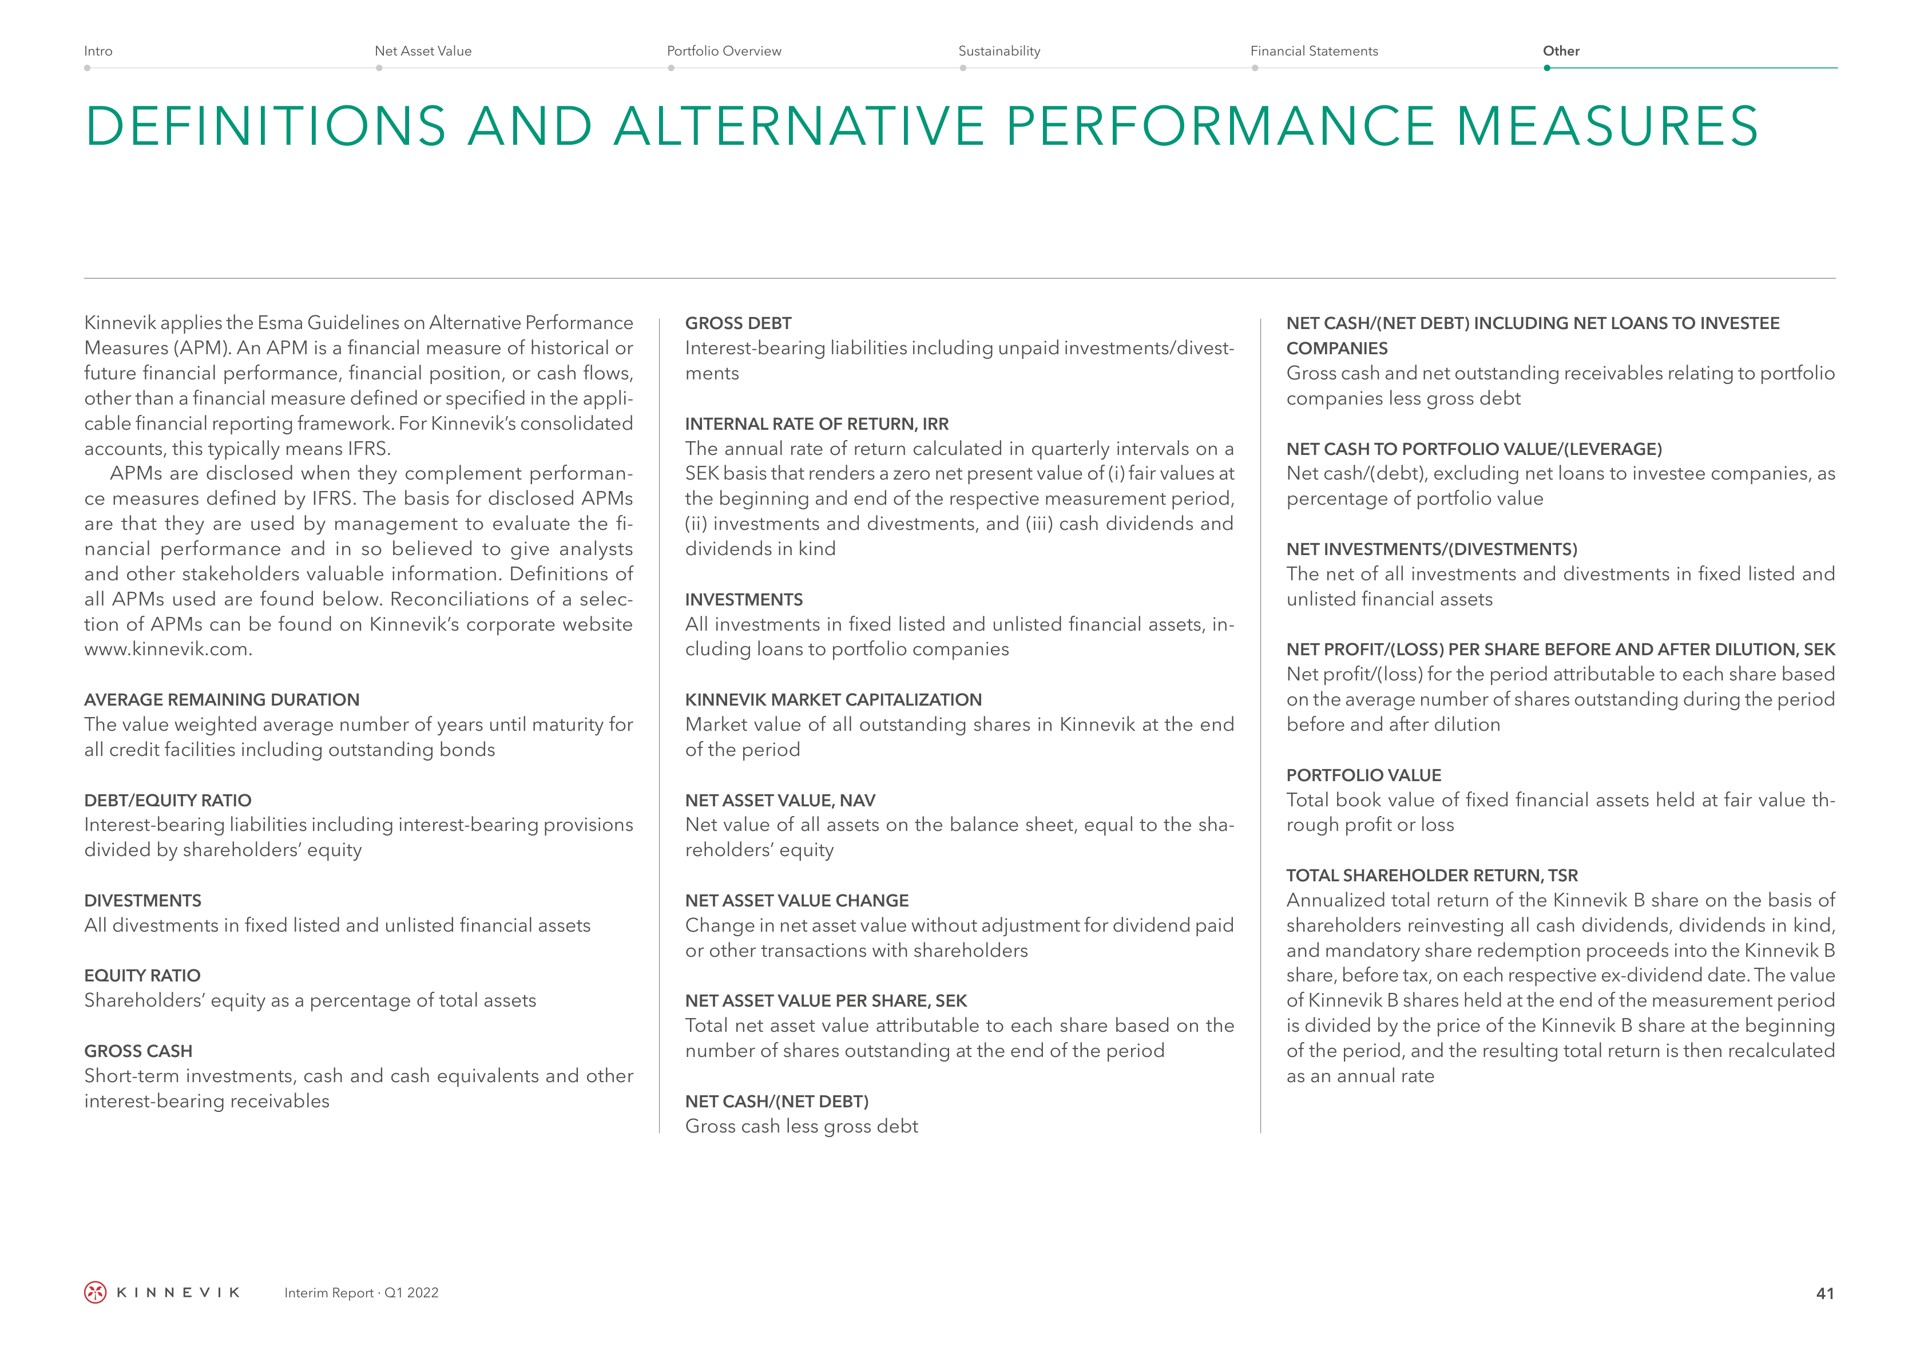 definitions and alternative performance measures applies the guidelines on alternative performance measures an is a financial measure of historical or future financial performance financial position or cash flows other than a financial measure defined or specified in the cable financial reporting framework for consolidated accounts this typically means are disclosed when they complement measures defined by the basis for disclosed are that they are used by management to evaluate the performance and in so believed to give analysts and other stakeholders valuable information definitions of all used are found below reconciliations of a of can be found on corporate gross debt interest bearing liabilities including unpaid investments divest internal rate of return the annual rate of return calculated in quarterly intervals on a basis that renders a zero net present value of i fair values at the beginning and end of the respective measurement period investments and and cash dividends and dividends in kind investments all investments in fixed listed and unlisted financial assets in loans to portfolio companies average remaining duration the value weighted average number of years until maturity for all credit facilities including outstanding bonds market capitalization market value of all outstanding shares in at the end of the period debt equity ratio interest bearing liabilities including interest bearing provisions divided by share holders equity net asset value net value of all assets on the balance sheet equal to the sha equity all in fixed listed and unlisted financial assets equity ratio shareholders equity as a percentage of total assets gross cash short term investments cash and cash equivalents and other interest bearing receivables net asset value change change in net asset value without adjustment for dividend paid or other transactions with shareholders net asset value per share total net asset value attributable to each share based on the number of shares outstanding at the end of the period net cash net debt gross cash less gross debt net cash net debt including net loans to companies gross cash and net outstanding receivables relating to portfolio companies less gross debt net cash to portfolio value leverage net cash debt excluding net loans to companies as percentage of portfolio value net investments the net of all investments and in fixed listed and unlisted financial assets net profit loss per share before and after dilution net profit loss for the period attributable to each share based on the average number of shares outstanding during the period before and after dilution total book value of fixed financial assets held at fair value rough profit or loss total shareholder return total return of the share on the basis of shareholders all cash dividends dividends in kind and mandatory share redemption proceeds into the share before tax on each respective dividend date the value of shares held at the end of the measurement period is divided by the price of the share at the beginning of the period and the resulting total return is then recalculated as an annual rate | Kinnevik